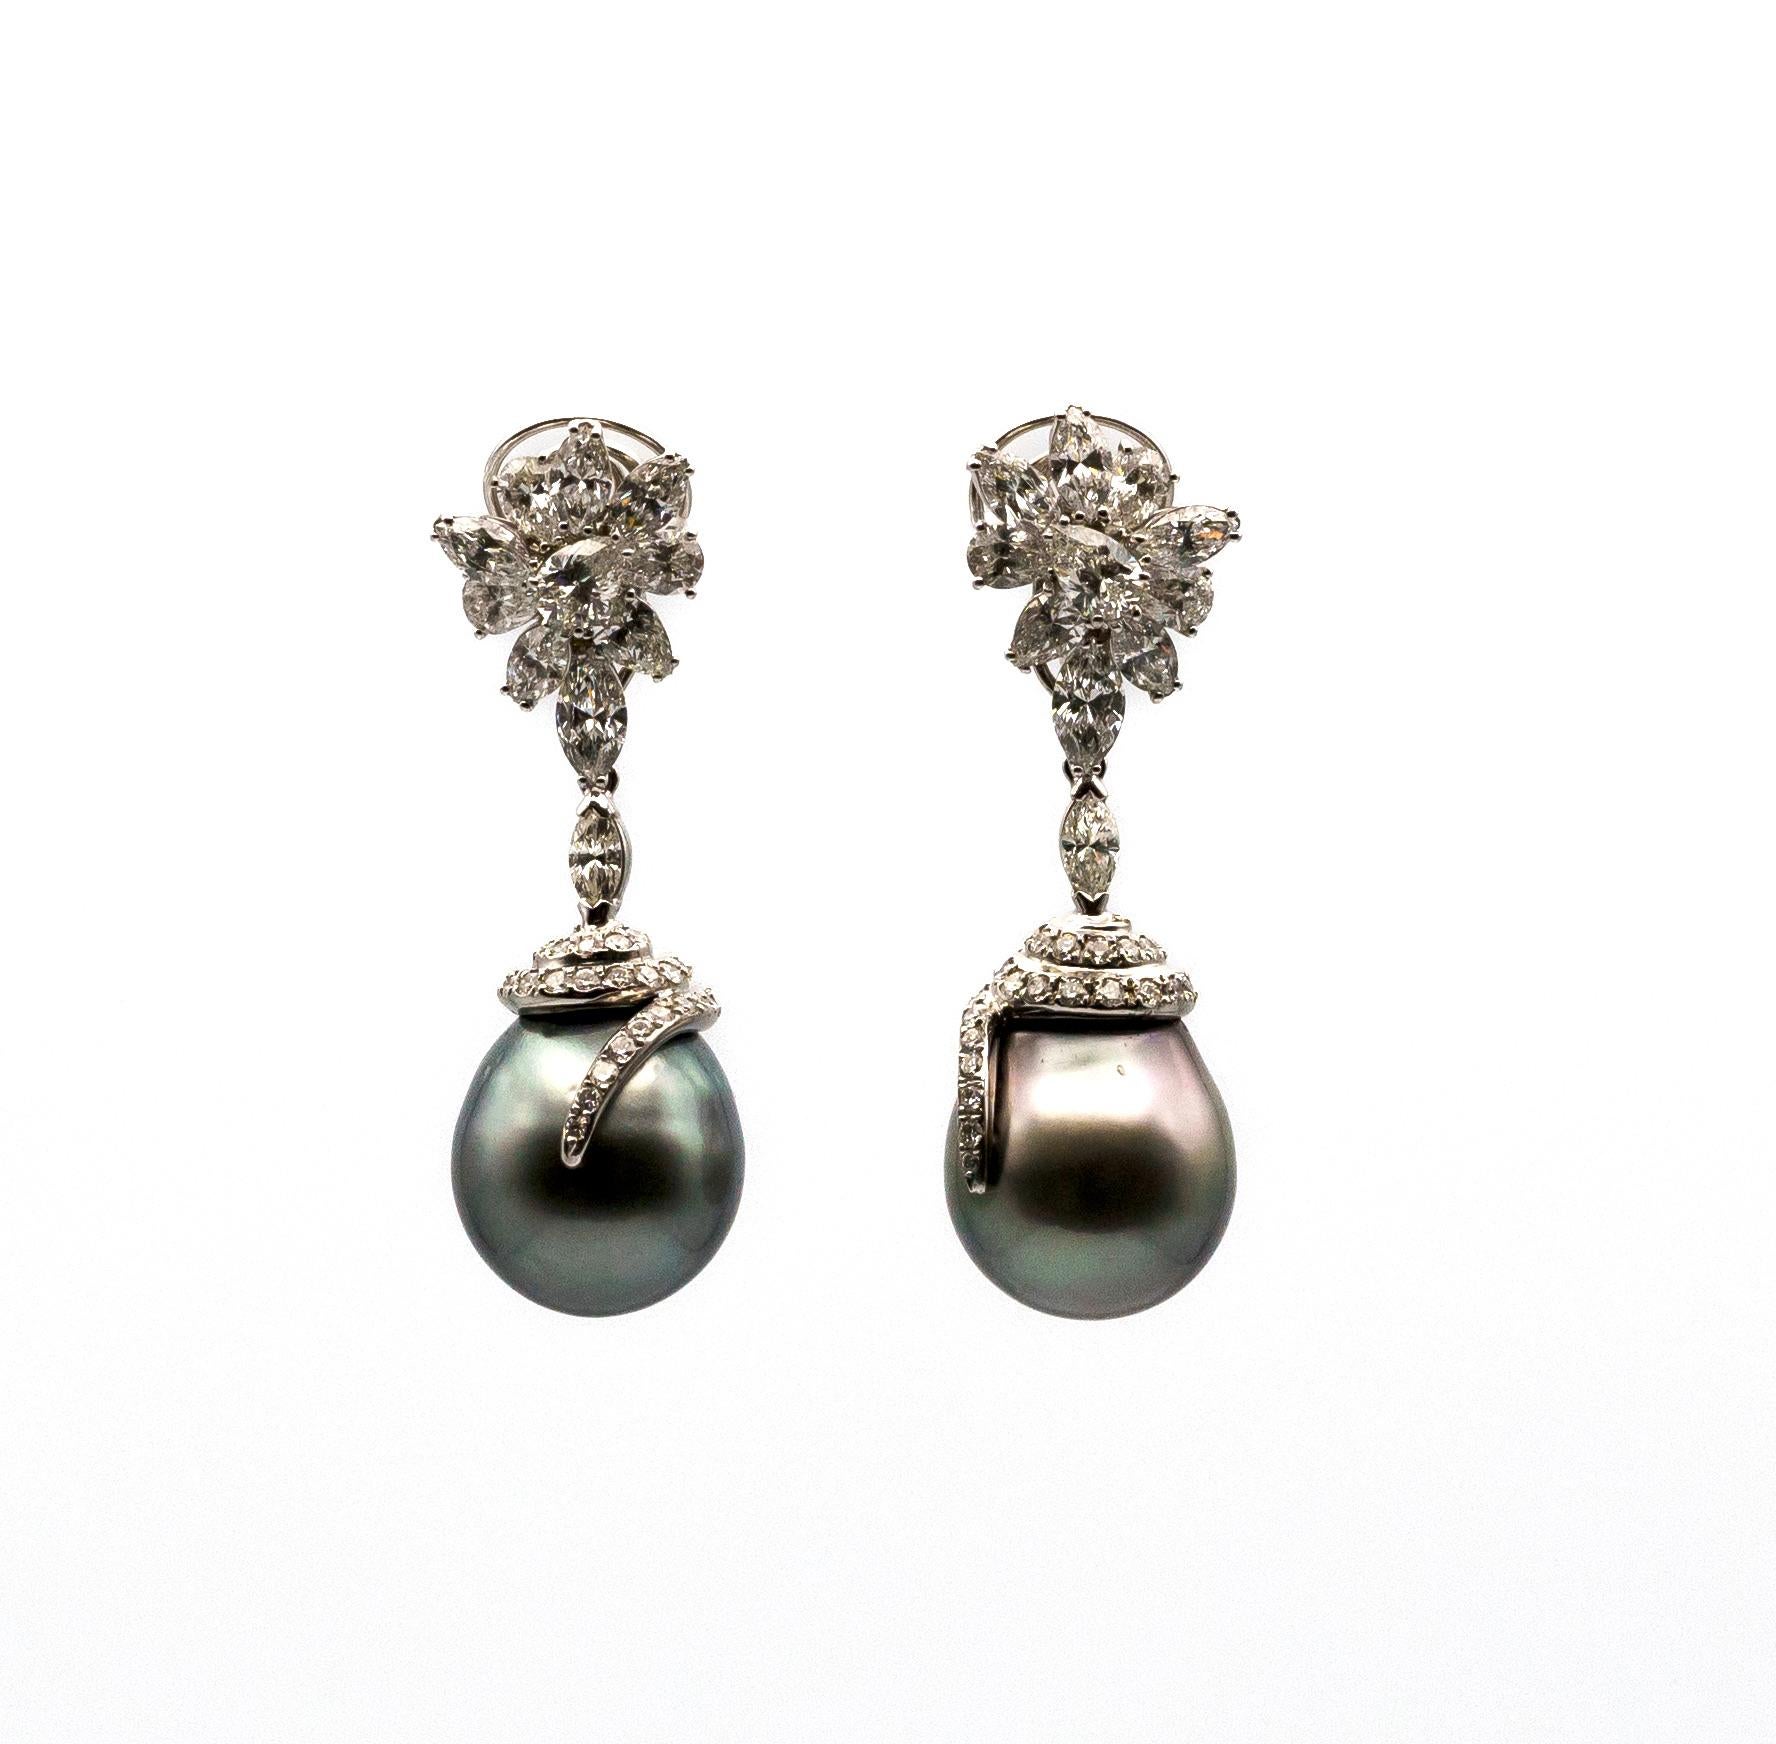 Pear Cut Earrings in white gold set with diamonds, tourmaline, topaze, morganite, pearls For Sale